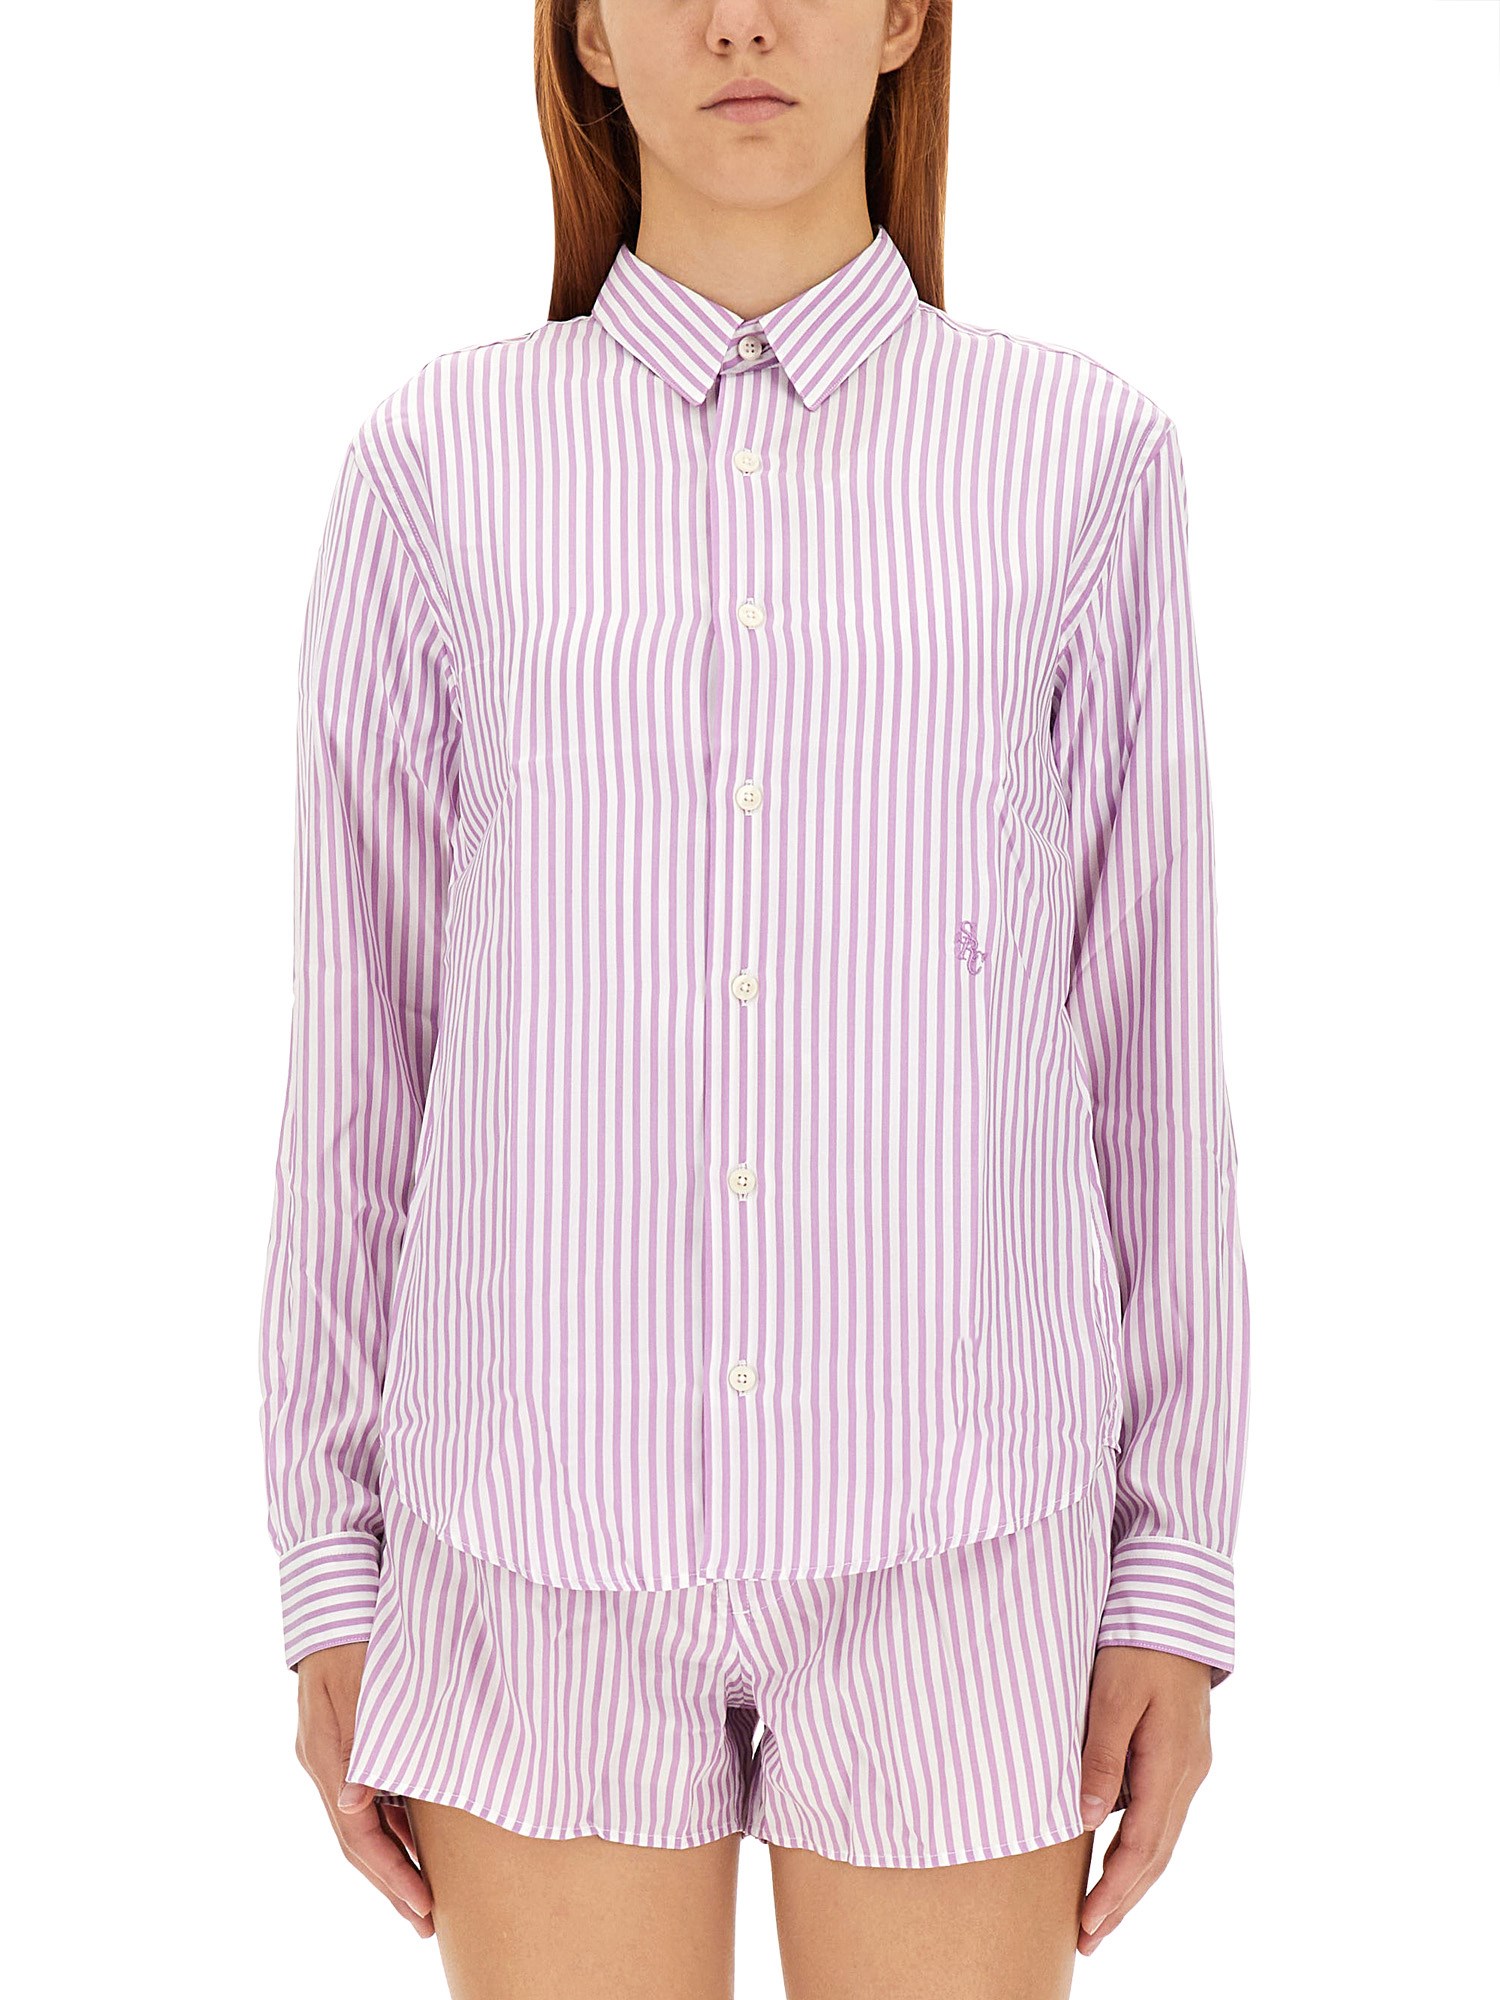 SPORTY AND RICH SHIRT WITH STRIPE PATTERN